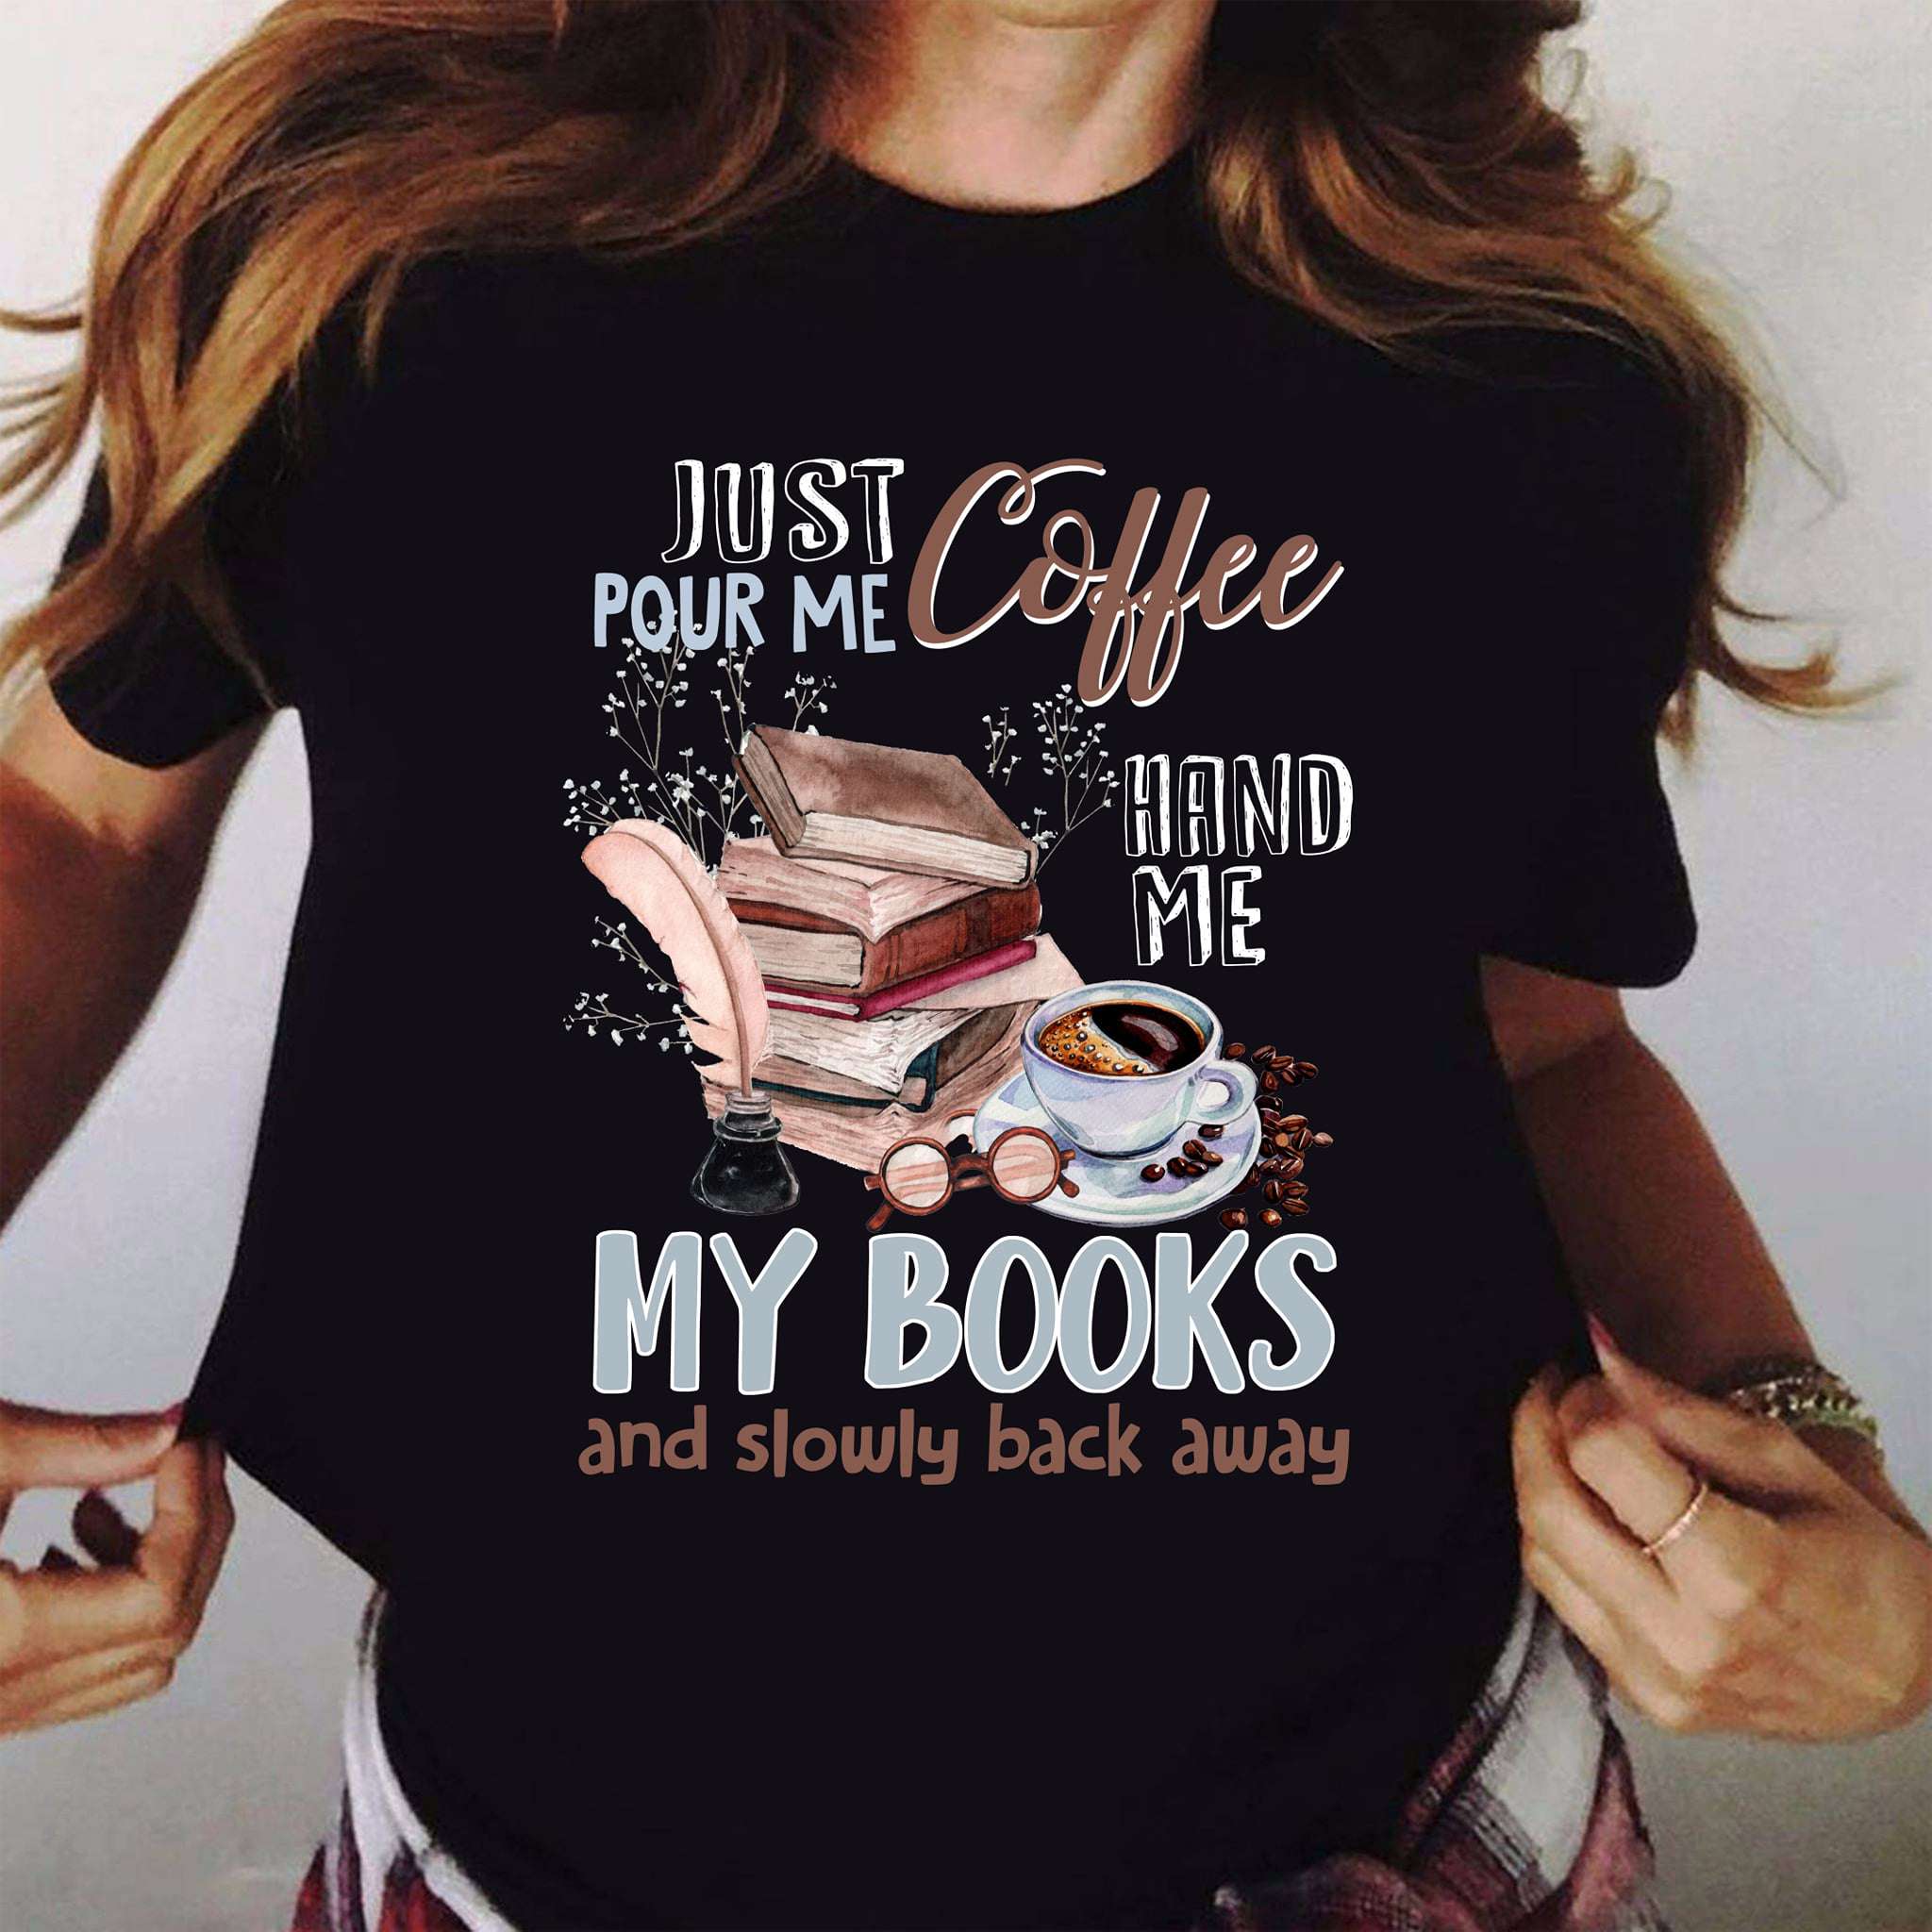 Just pour me coffee, hand me my books and slowly back away - Coffee and  books, reading book the hobby Shirt, Hoodie, Sweatshirt - FridayStuff